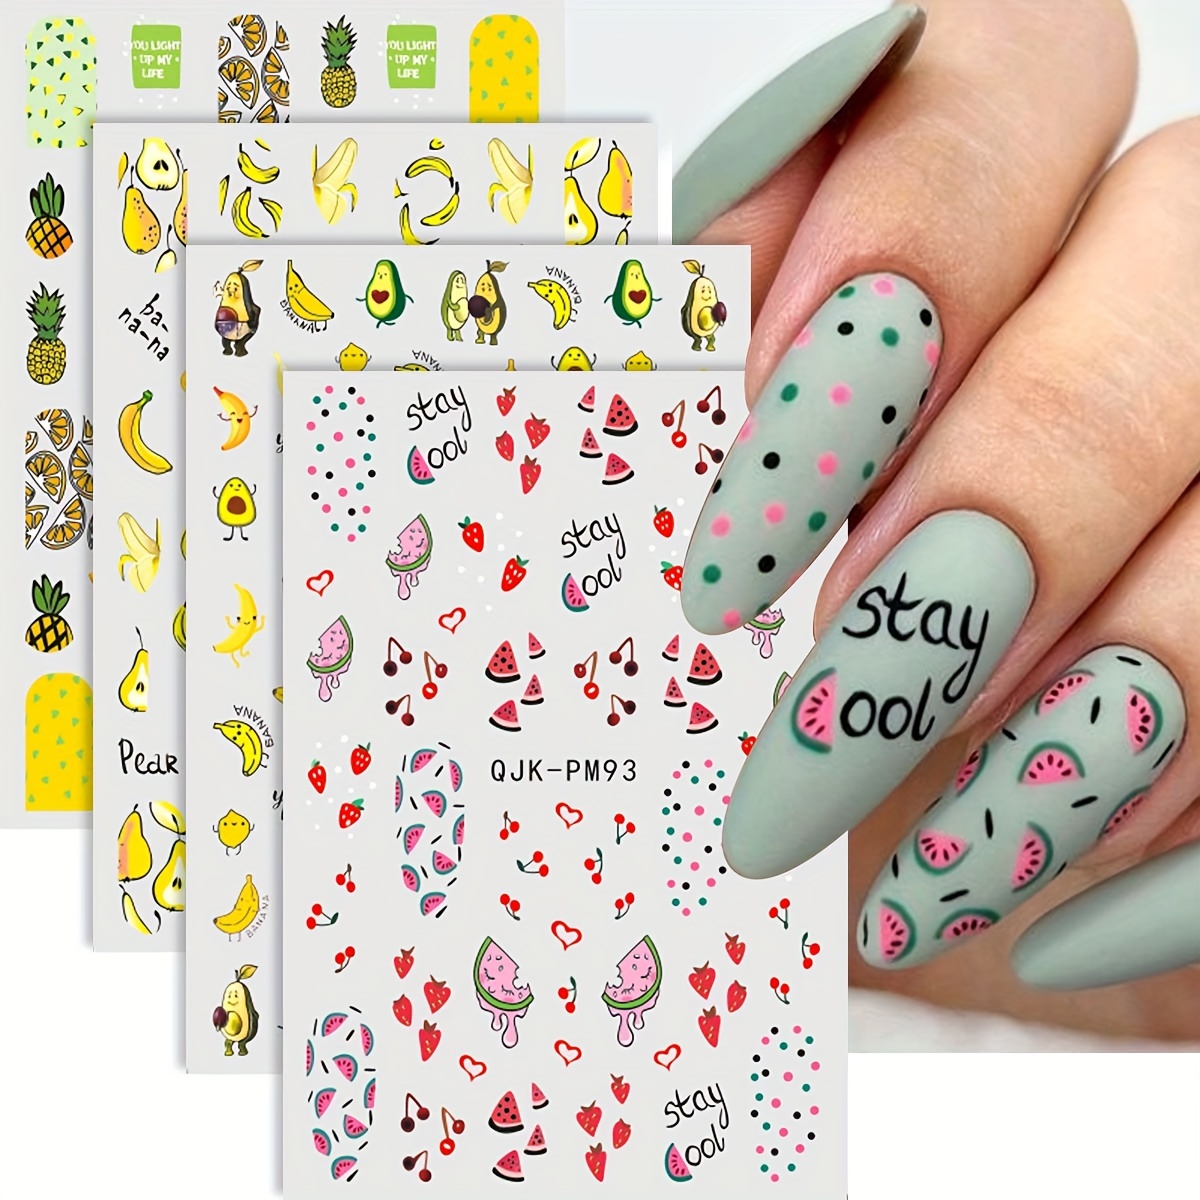 

4 Sheets Summer Fruits 3d Nail Stickers Self Adhesive Cute Cartoon Pineapple Banana Watermelon Cherry Design Nail Stickers Decal Manicure Decorations